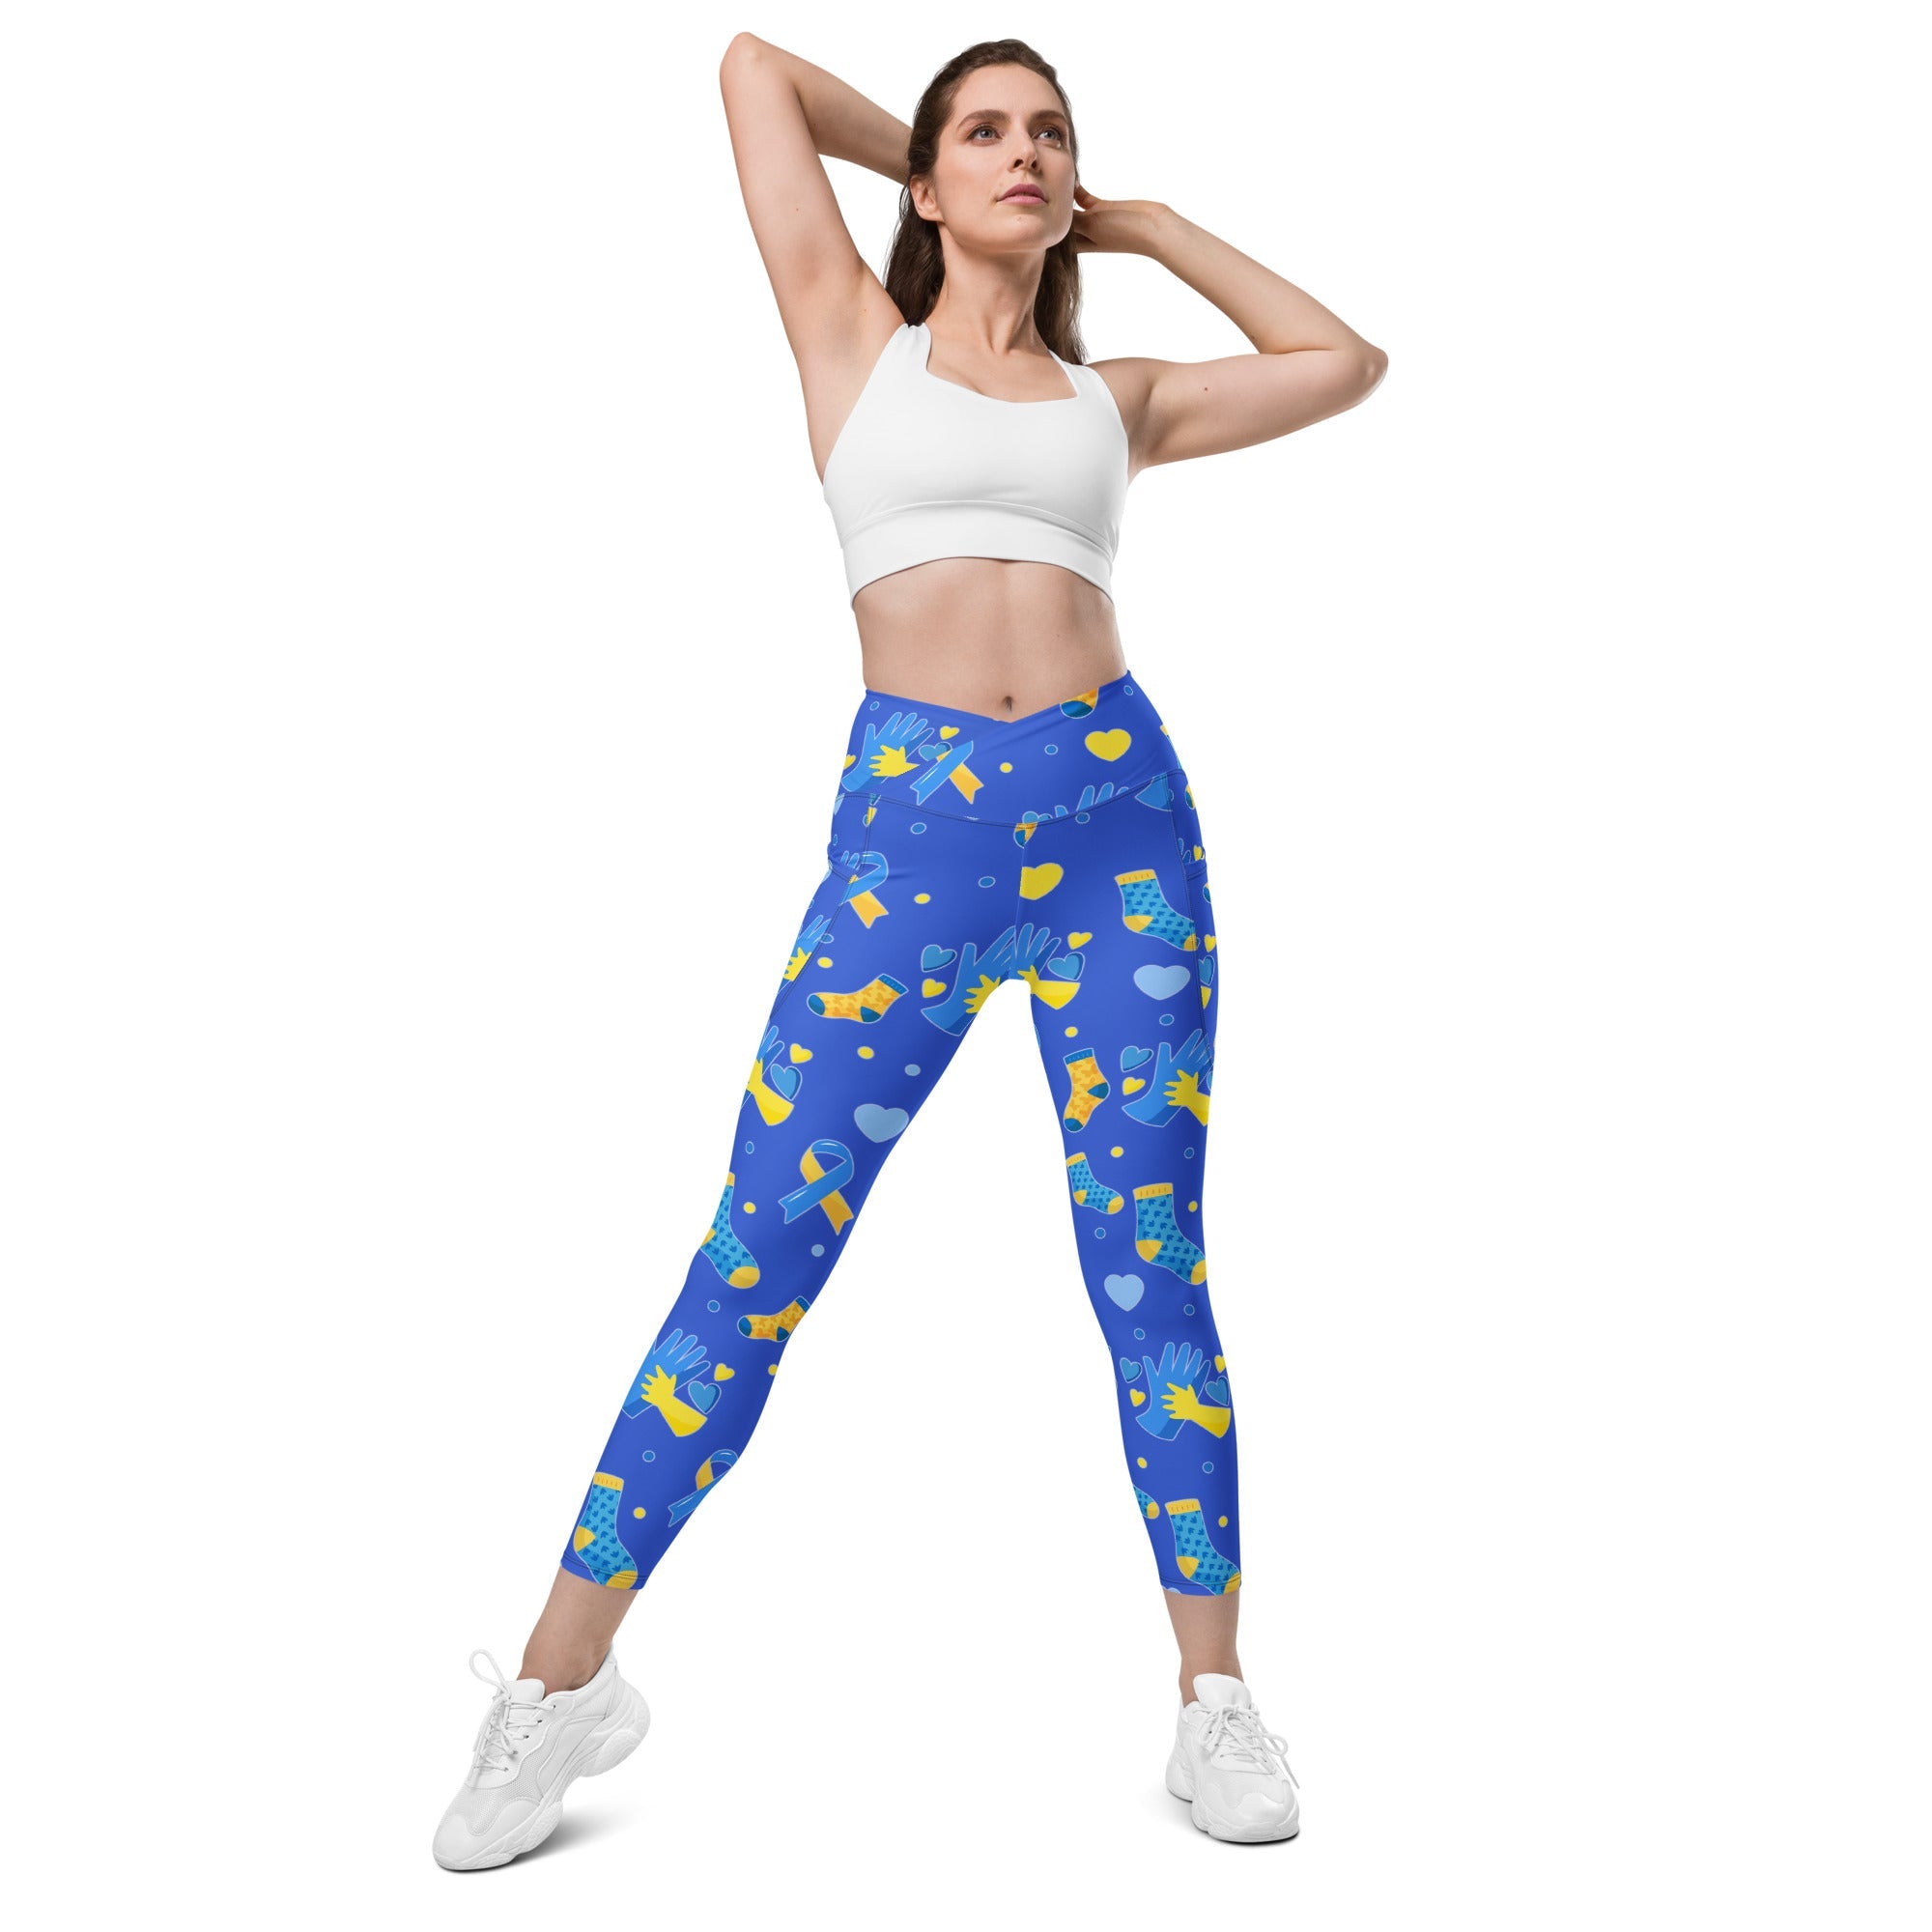 Down Syndrome Awareness Crossover Leggings With Pockets